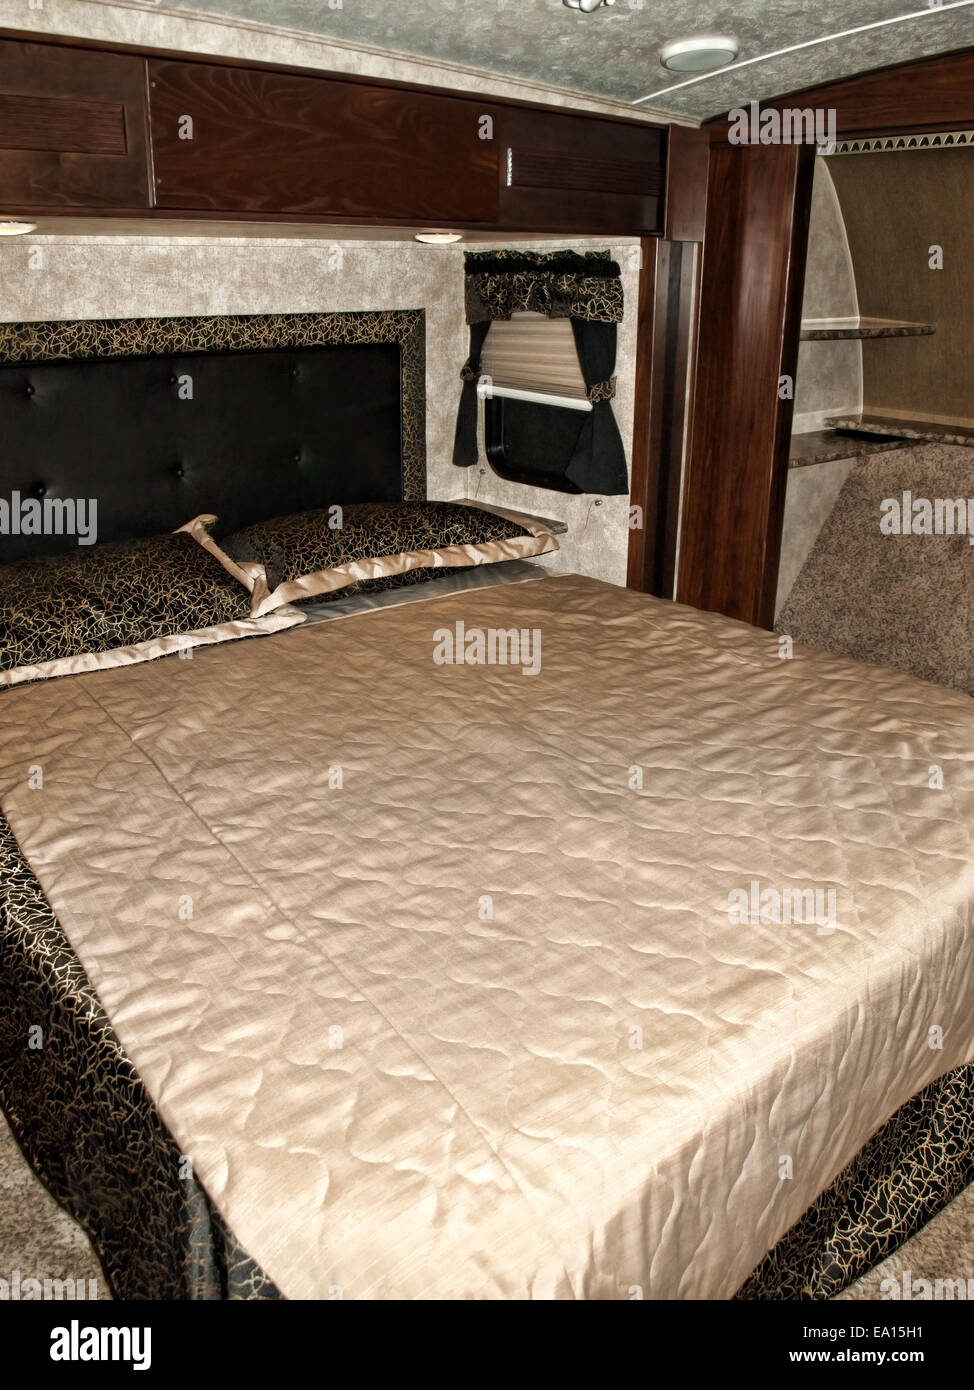 bedroom in a recreational vehicle Stock Photo